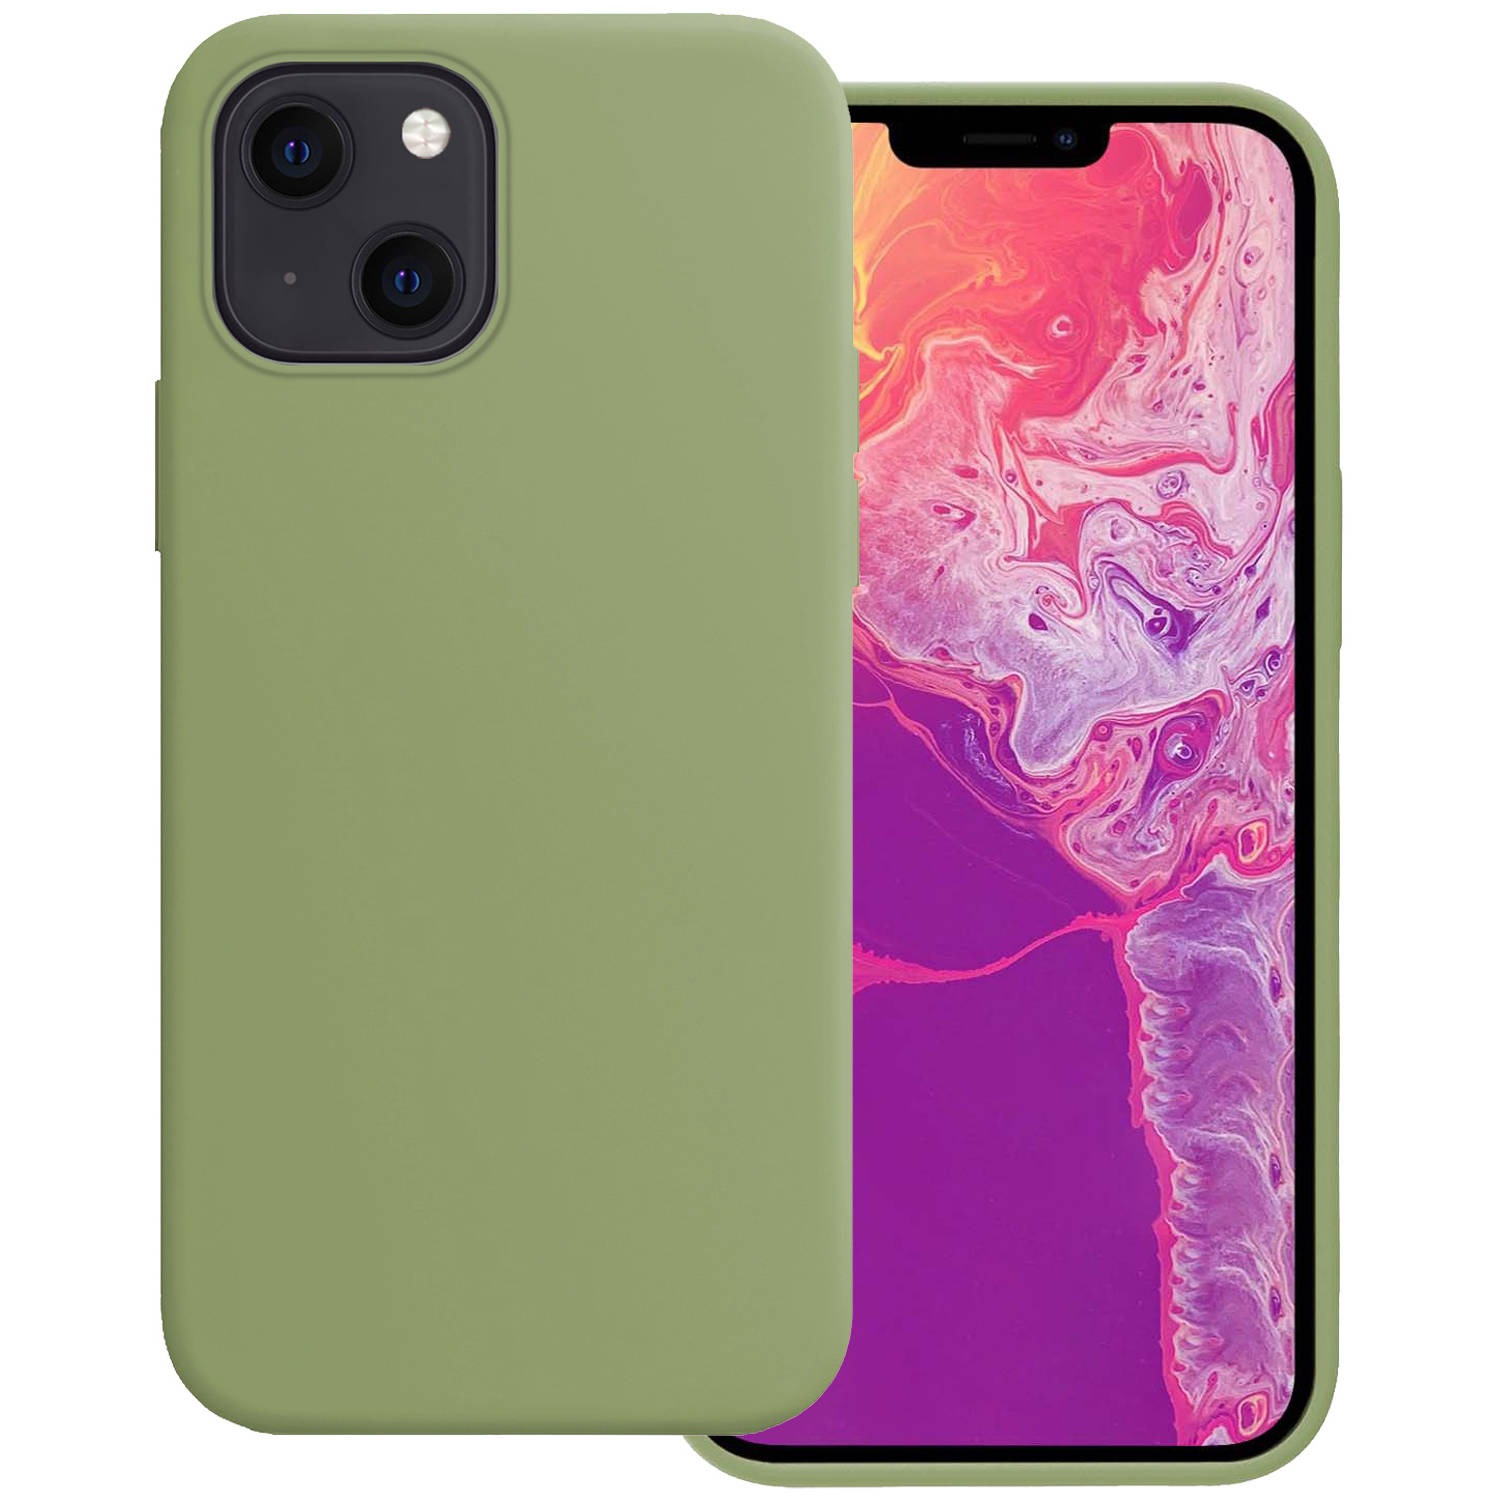 Basey iPhone 13 Mini Hoesje Silicone Case iPhone 13 Mini Case Groen Siliconen Hoes iPhone 13 Mini Ho